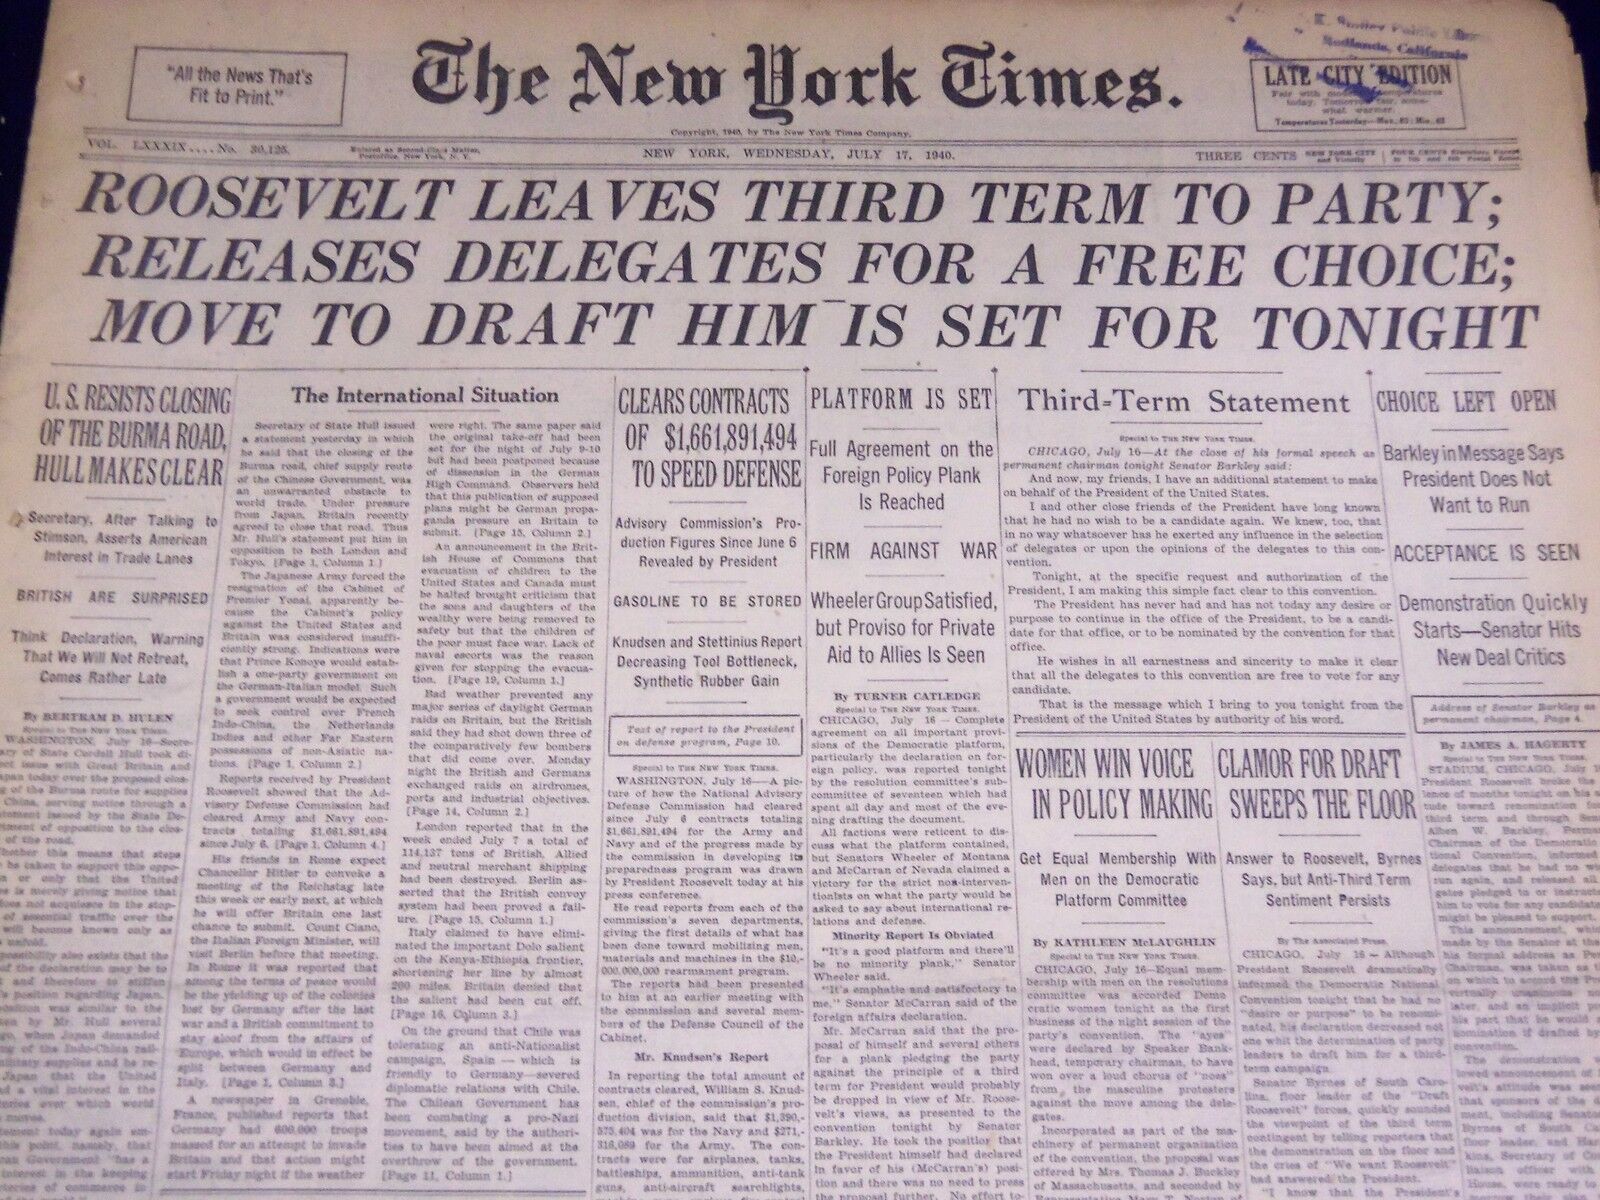 1940 JULY 17 NEW YORK TIMES - ROOSEVELT LEAVES 3RD TERM TO PARTY - NT 2949